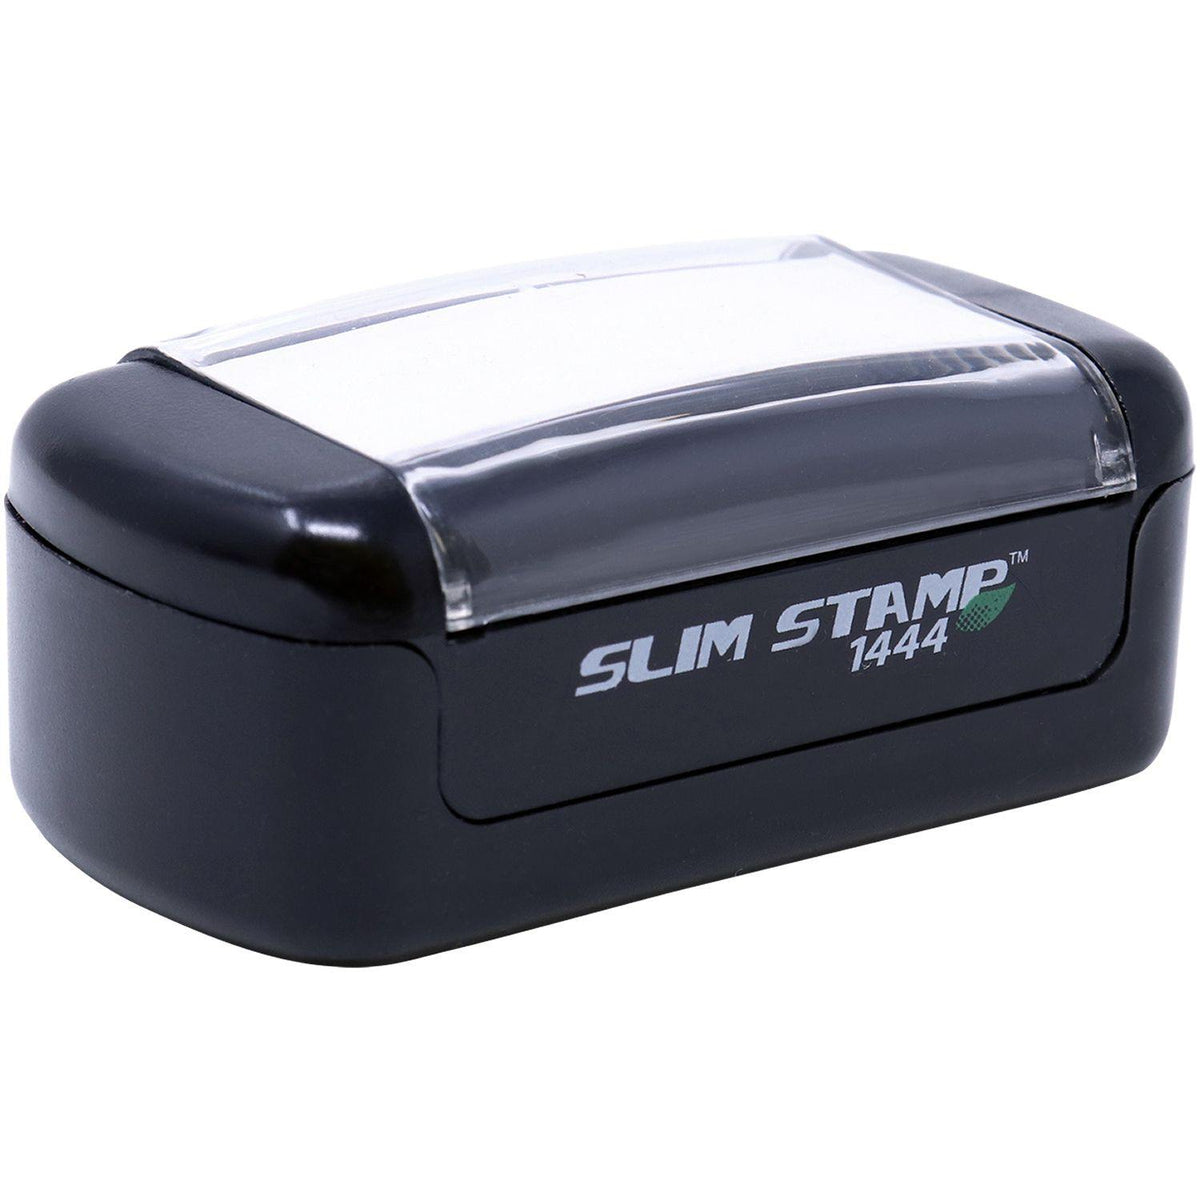 Alt View of Slim Pre Inked Hot Document Stamp Mount Angle